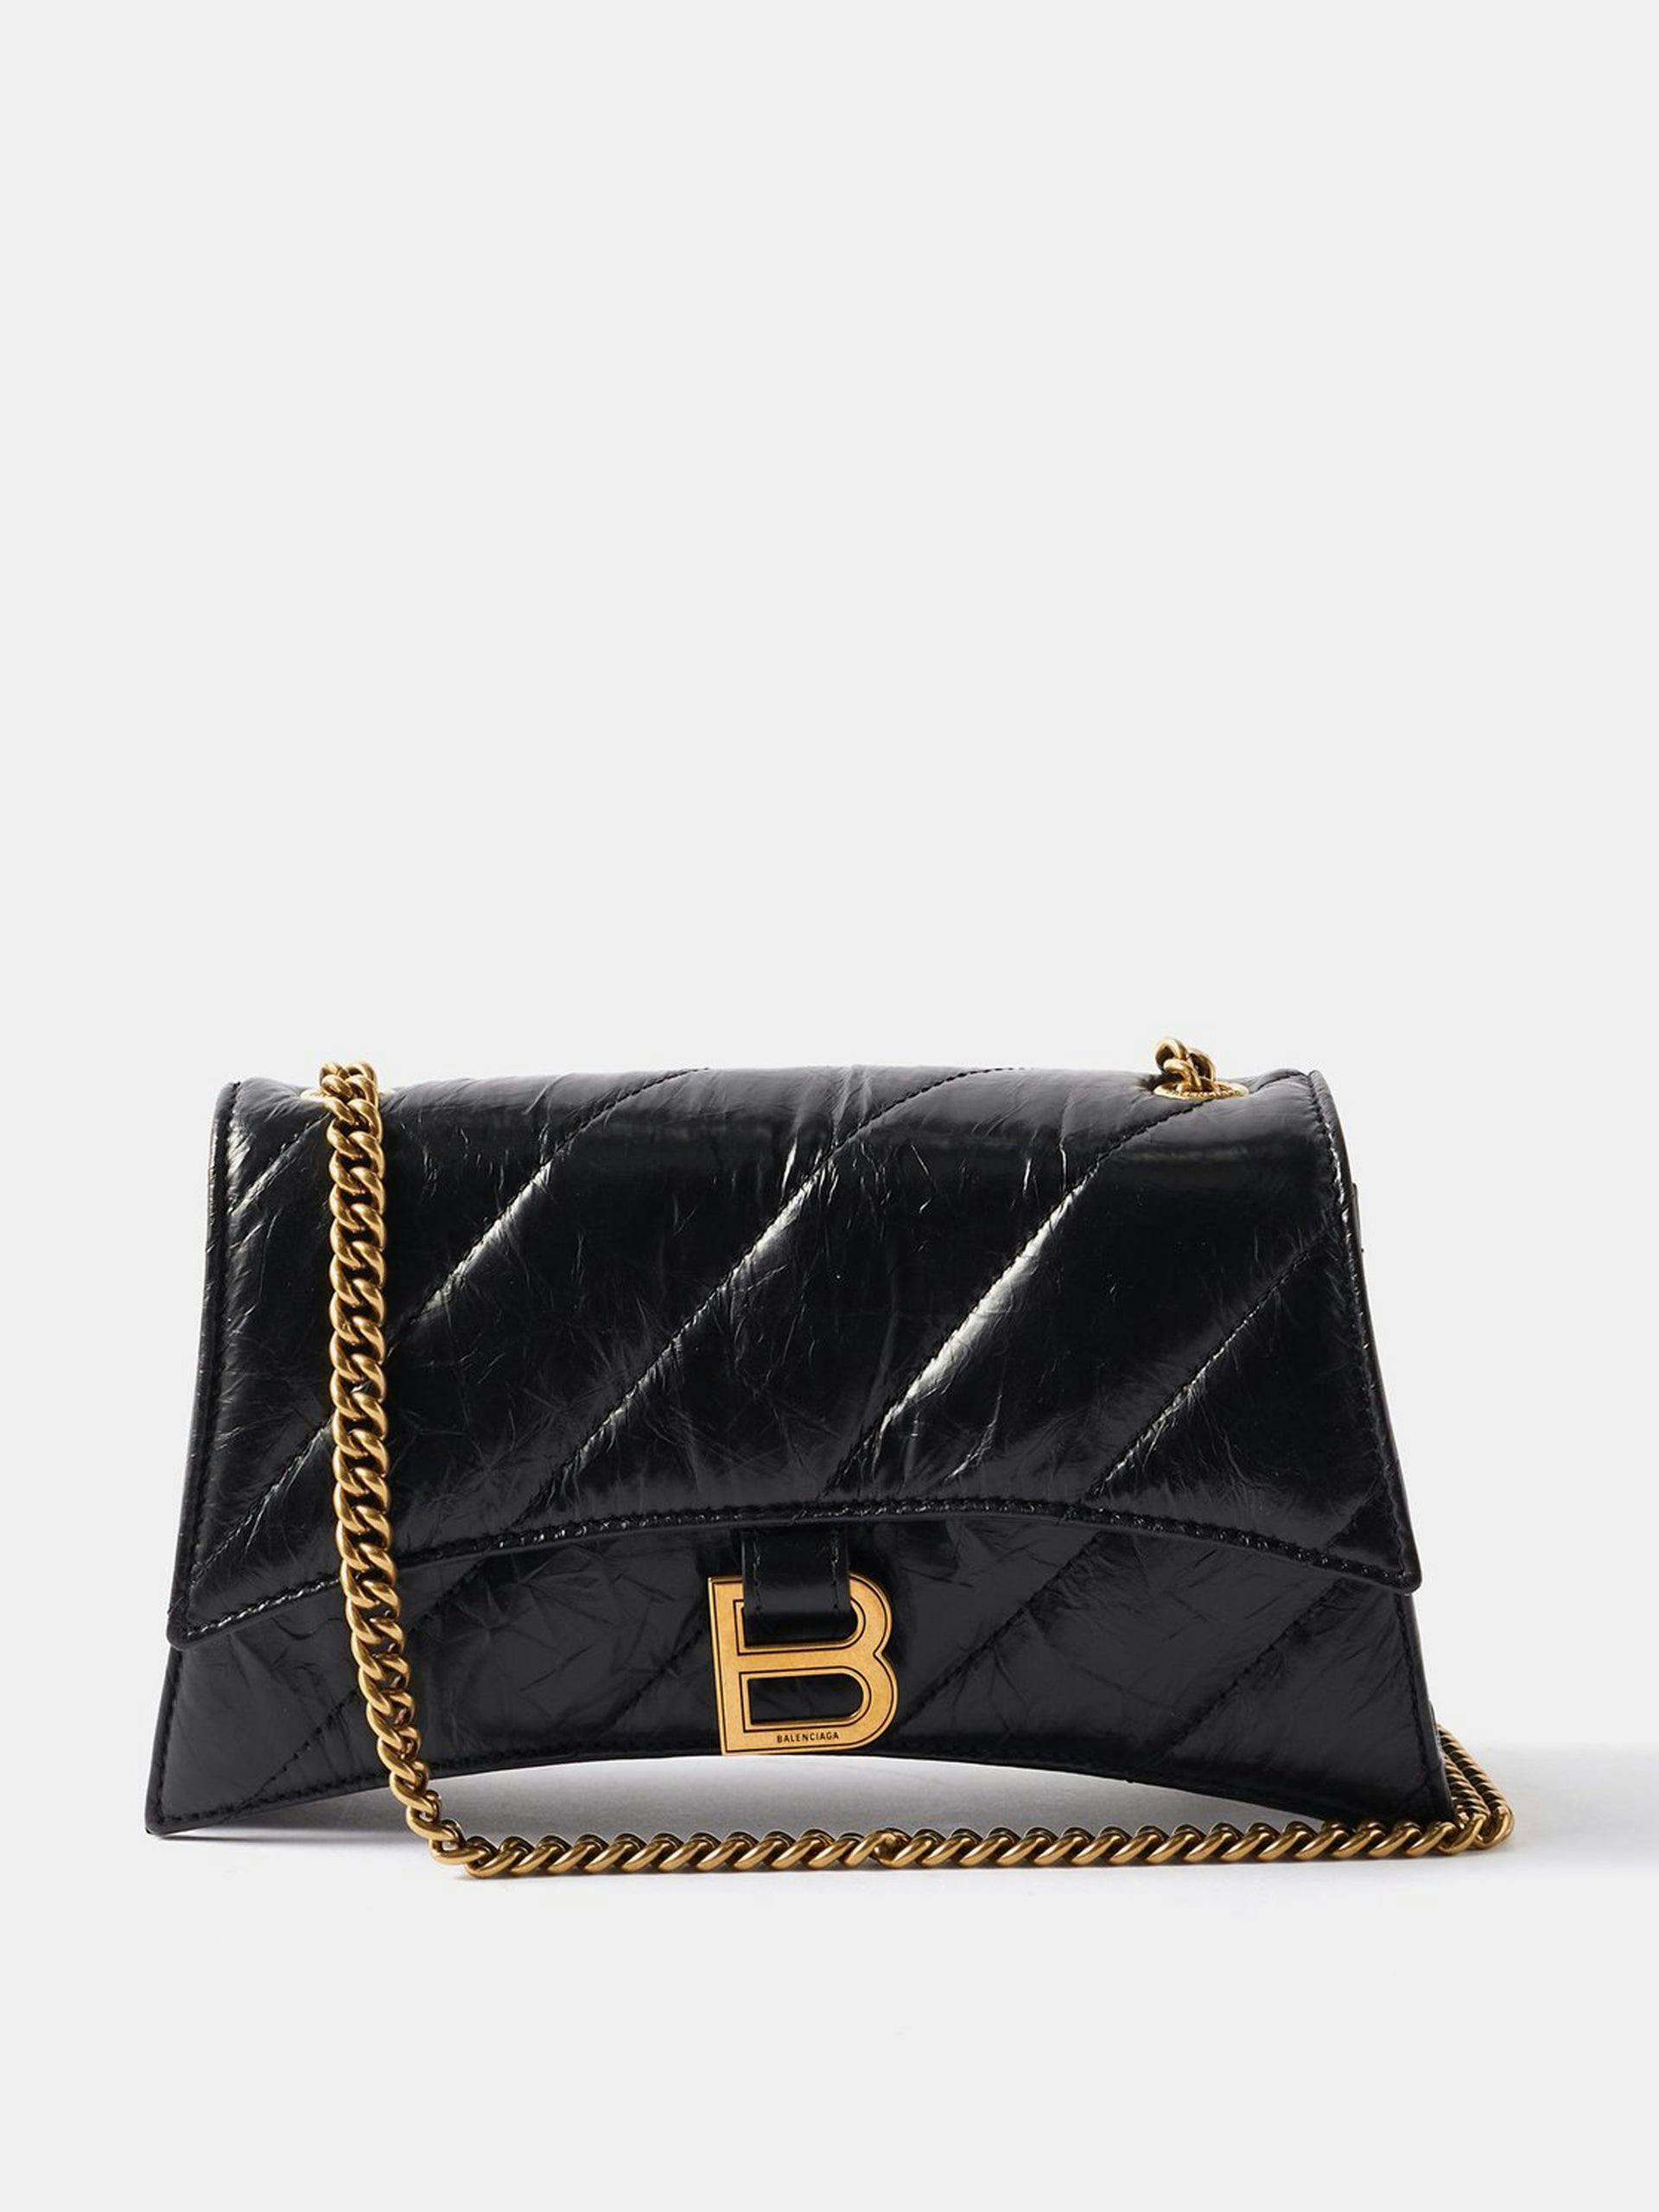 Black quilted leather cross body bag